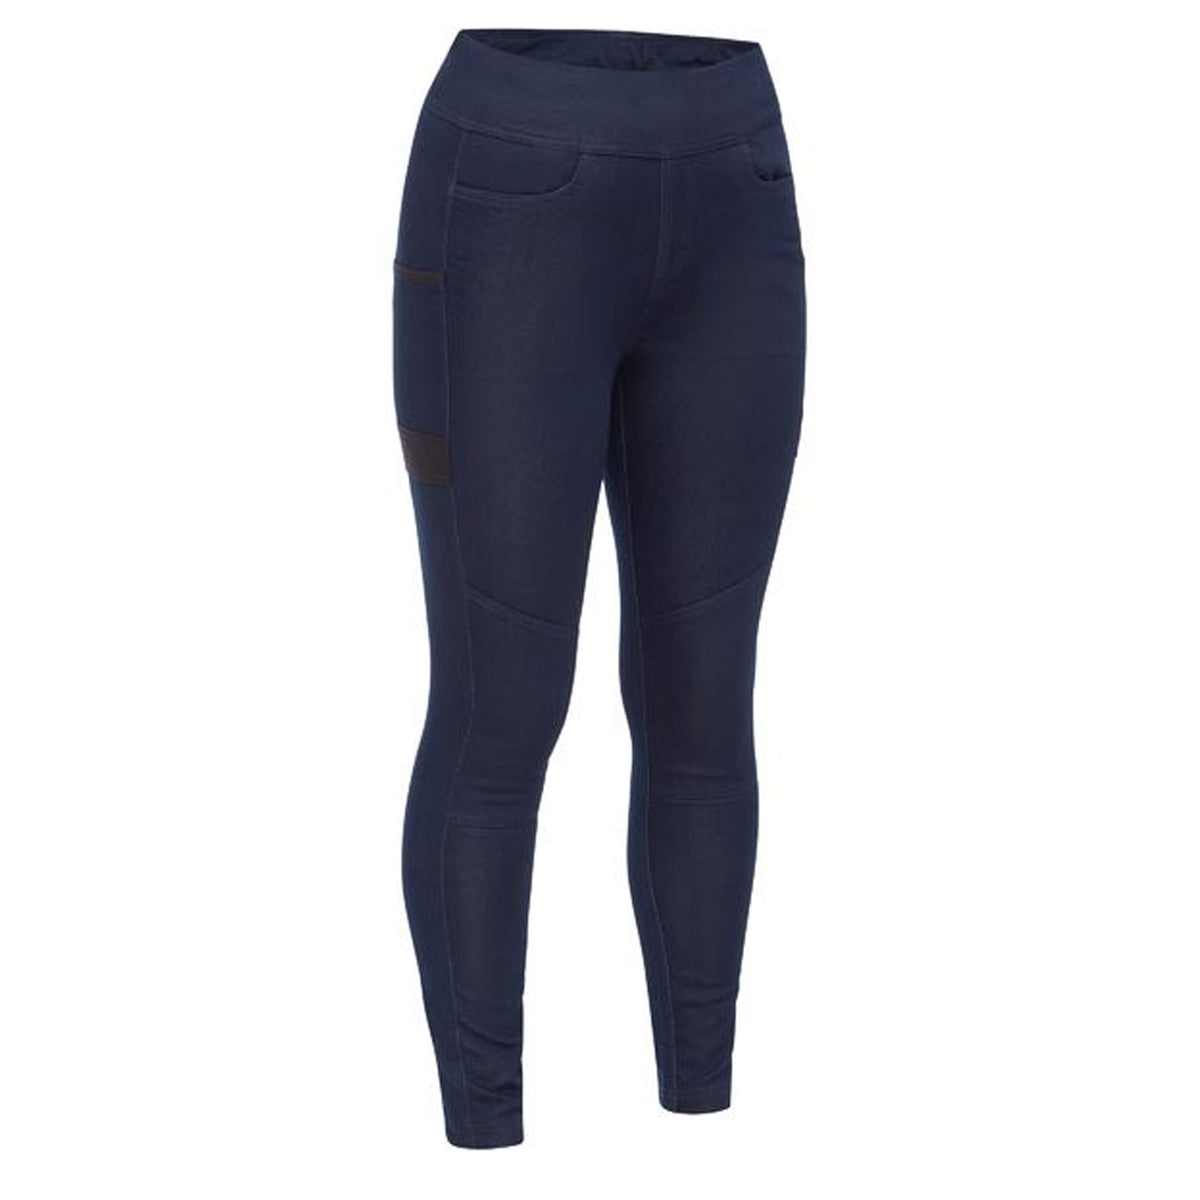 bisley womens flx and move jegging in blue